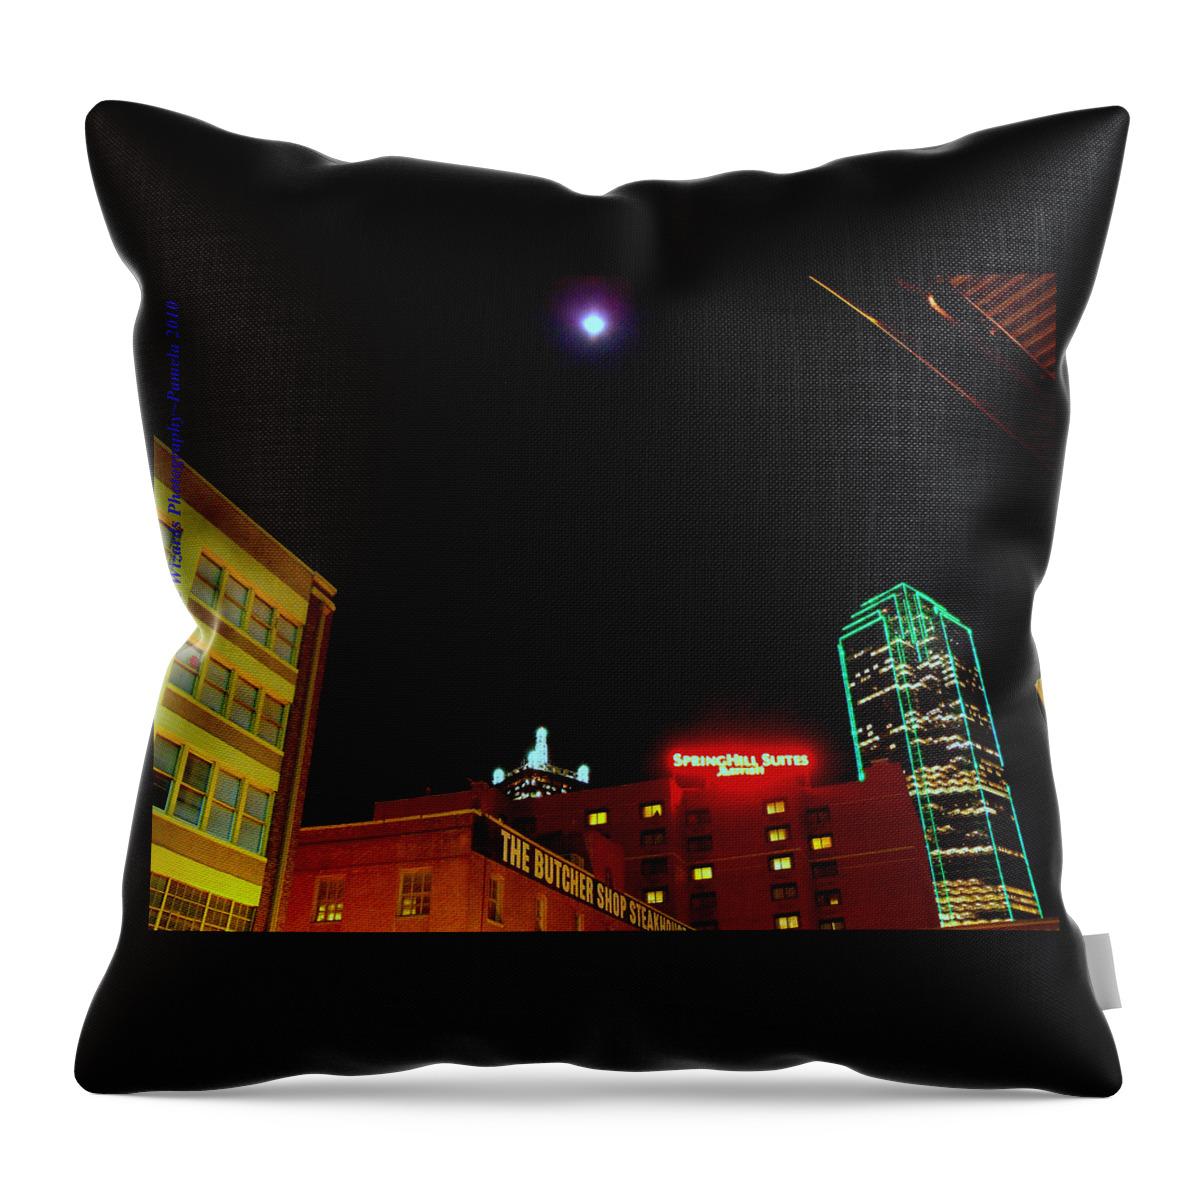 Dallas Street Throw Pillow featuring the digital art Full Moon Over Dallas Streets by Pamela Smale Williams